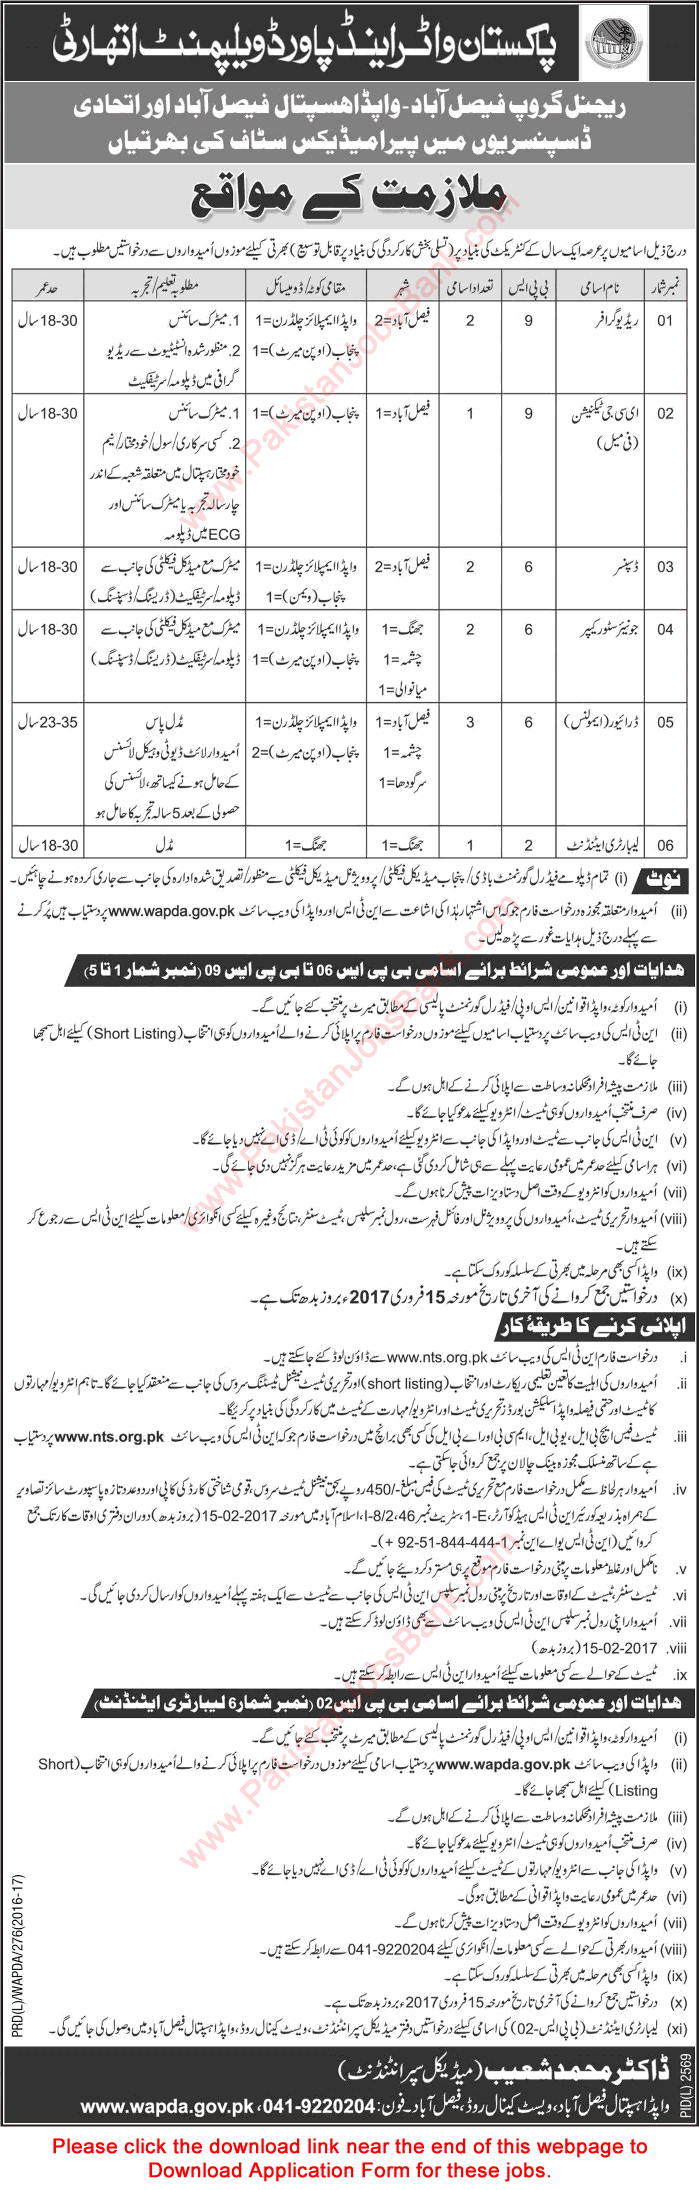 WAPDA Hospital Faisalabad & Allied Dispensaries Jobs 2017 NTS Application Form Dispensers, Store Keepers & Others Latest